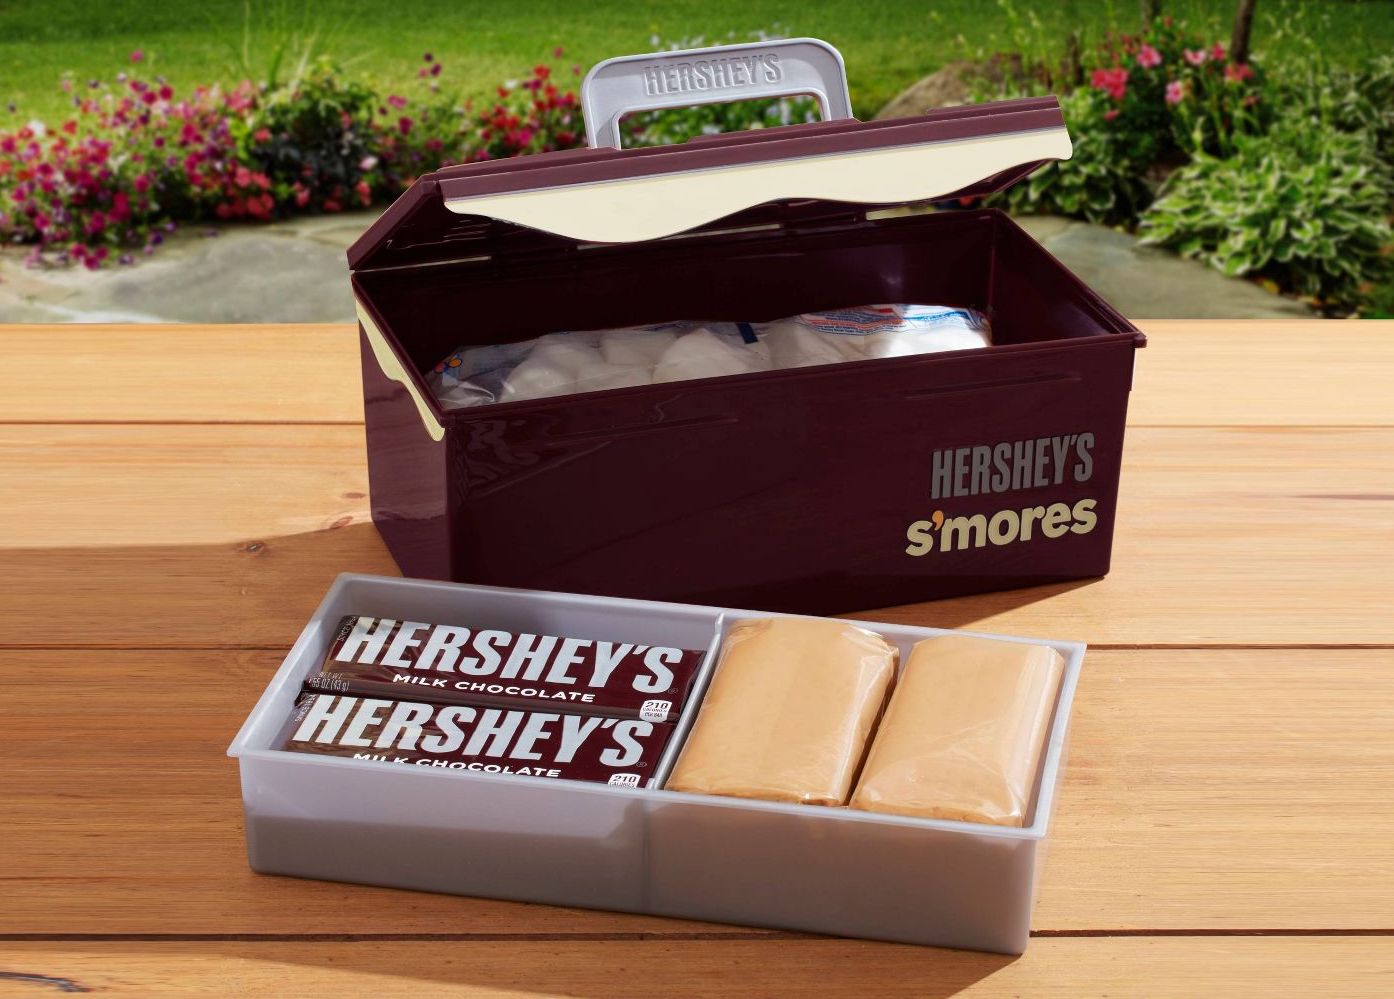 Hershey's Caddy with s'mores supplies